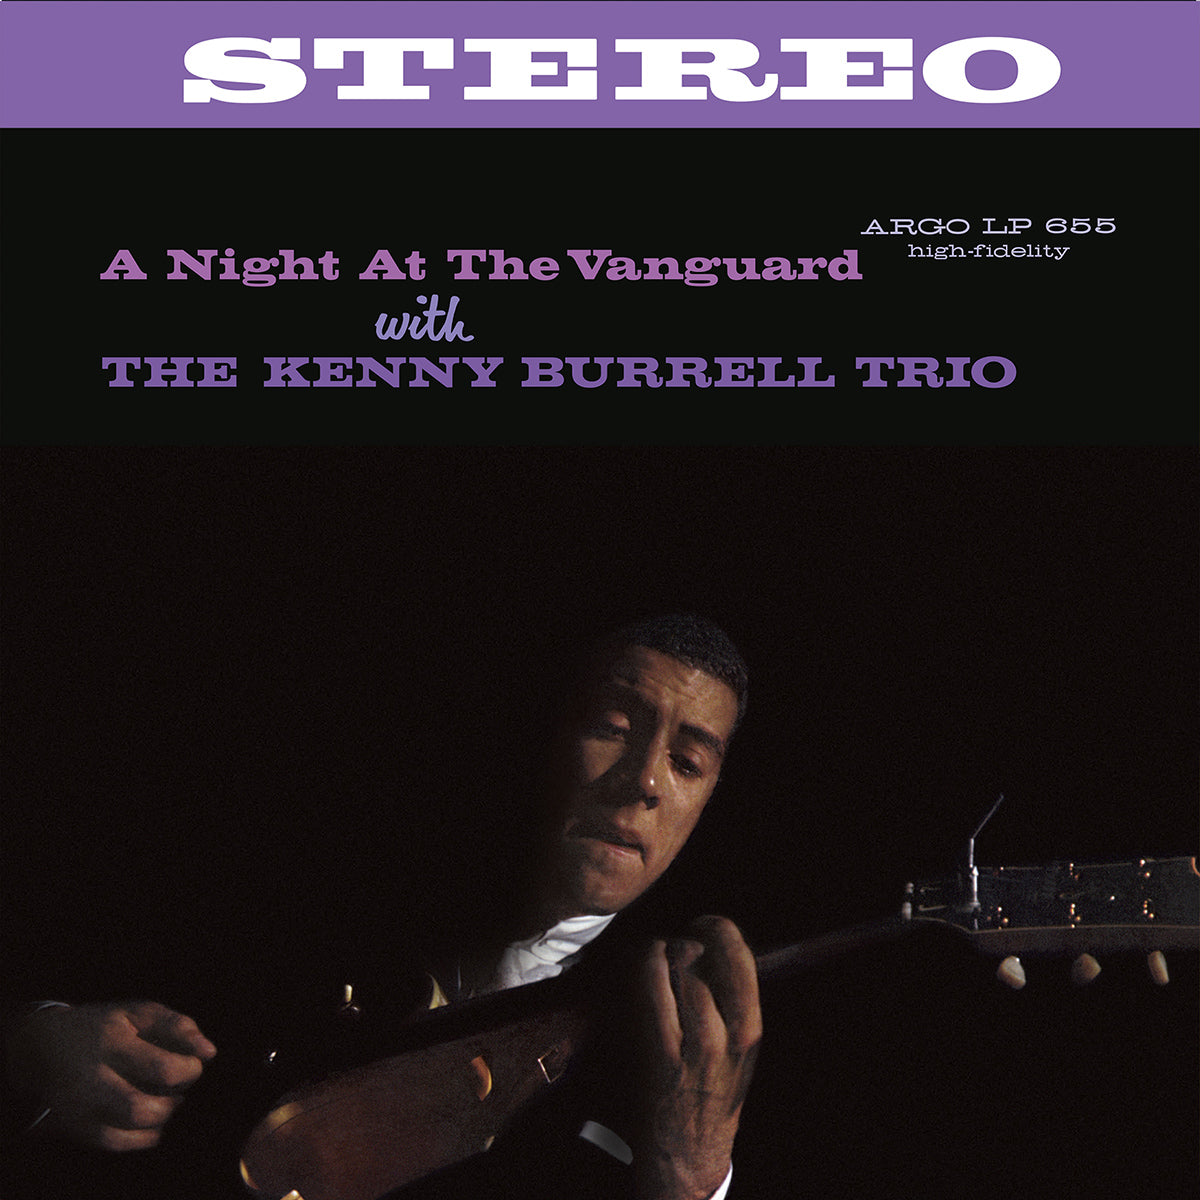 Kenny Burrell - A Night At The Vanguard Chess (Verve By Request): Vinyl LP